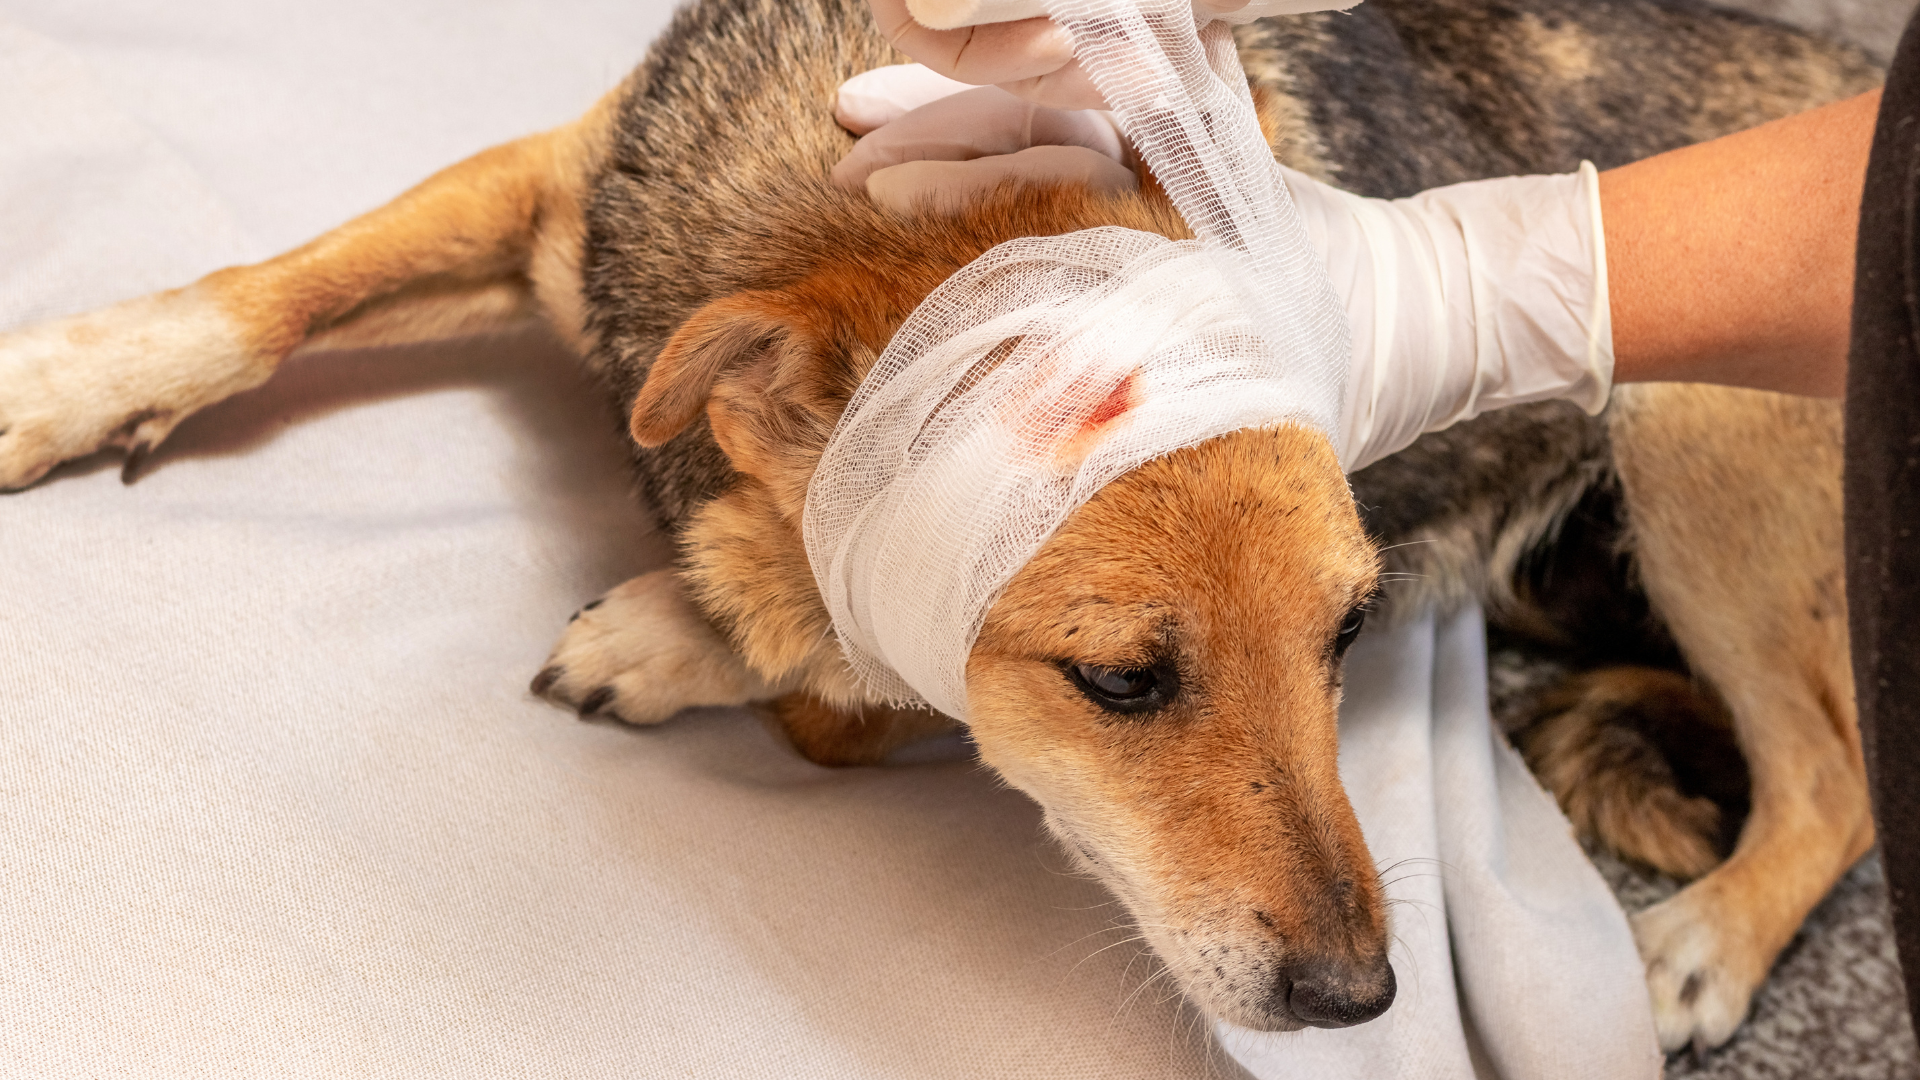 a person putting bandage on a dog's head